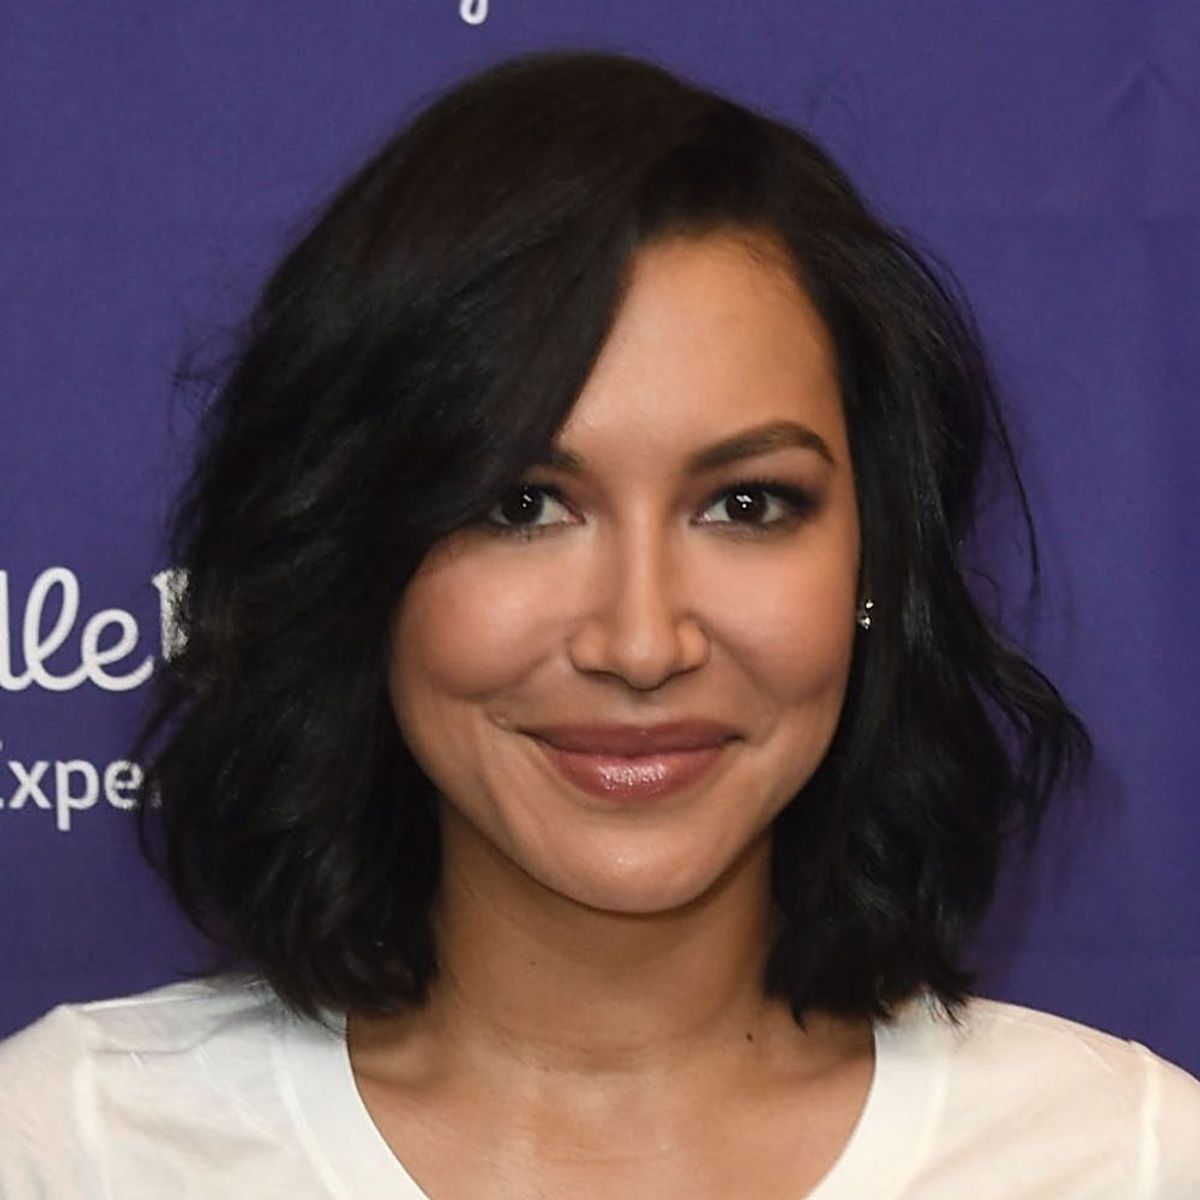 Naya Rivera Has Been Arrested for Domestic Battery